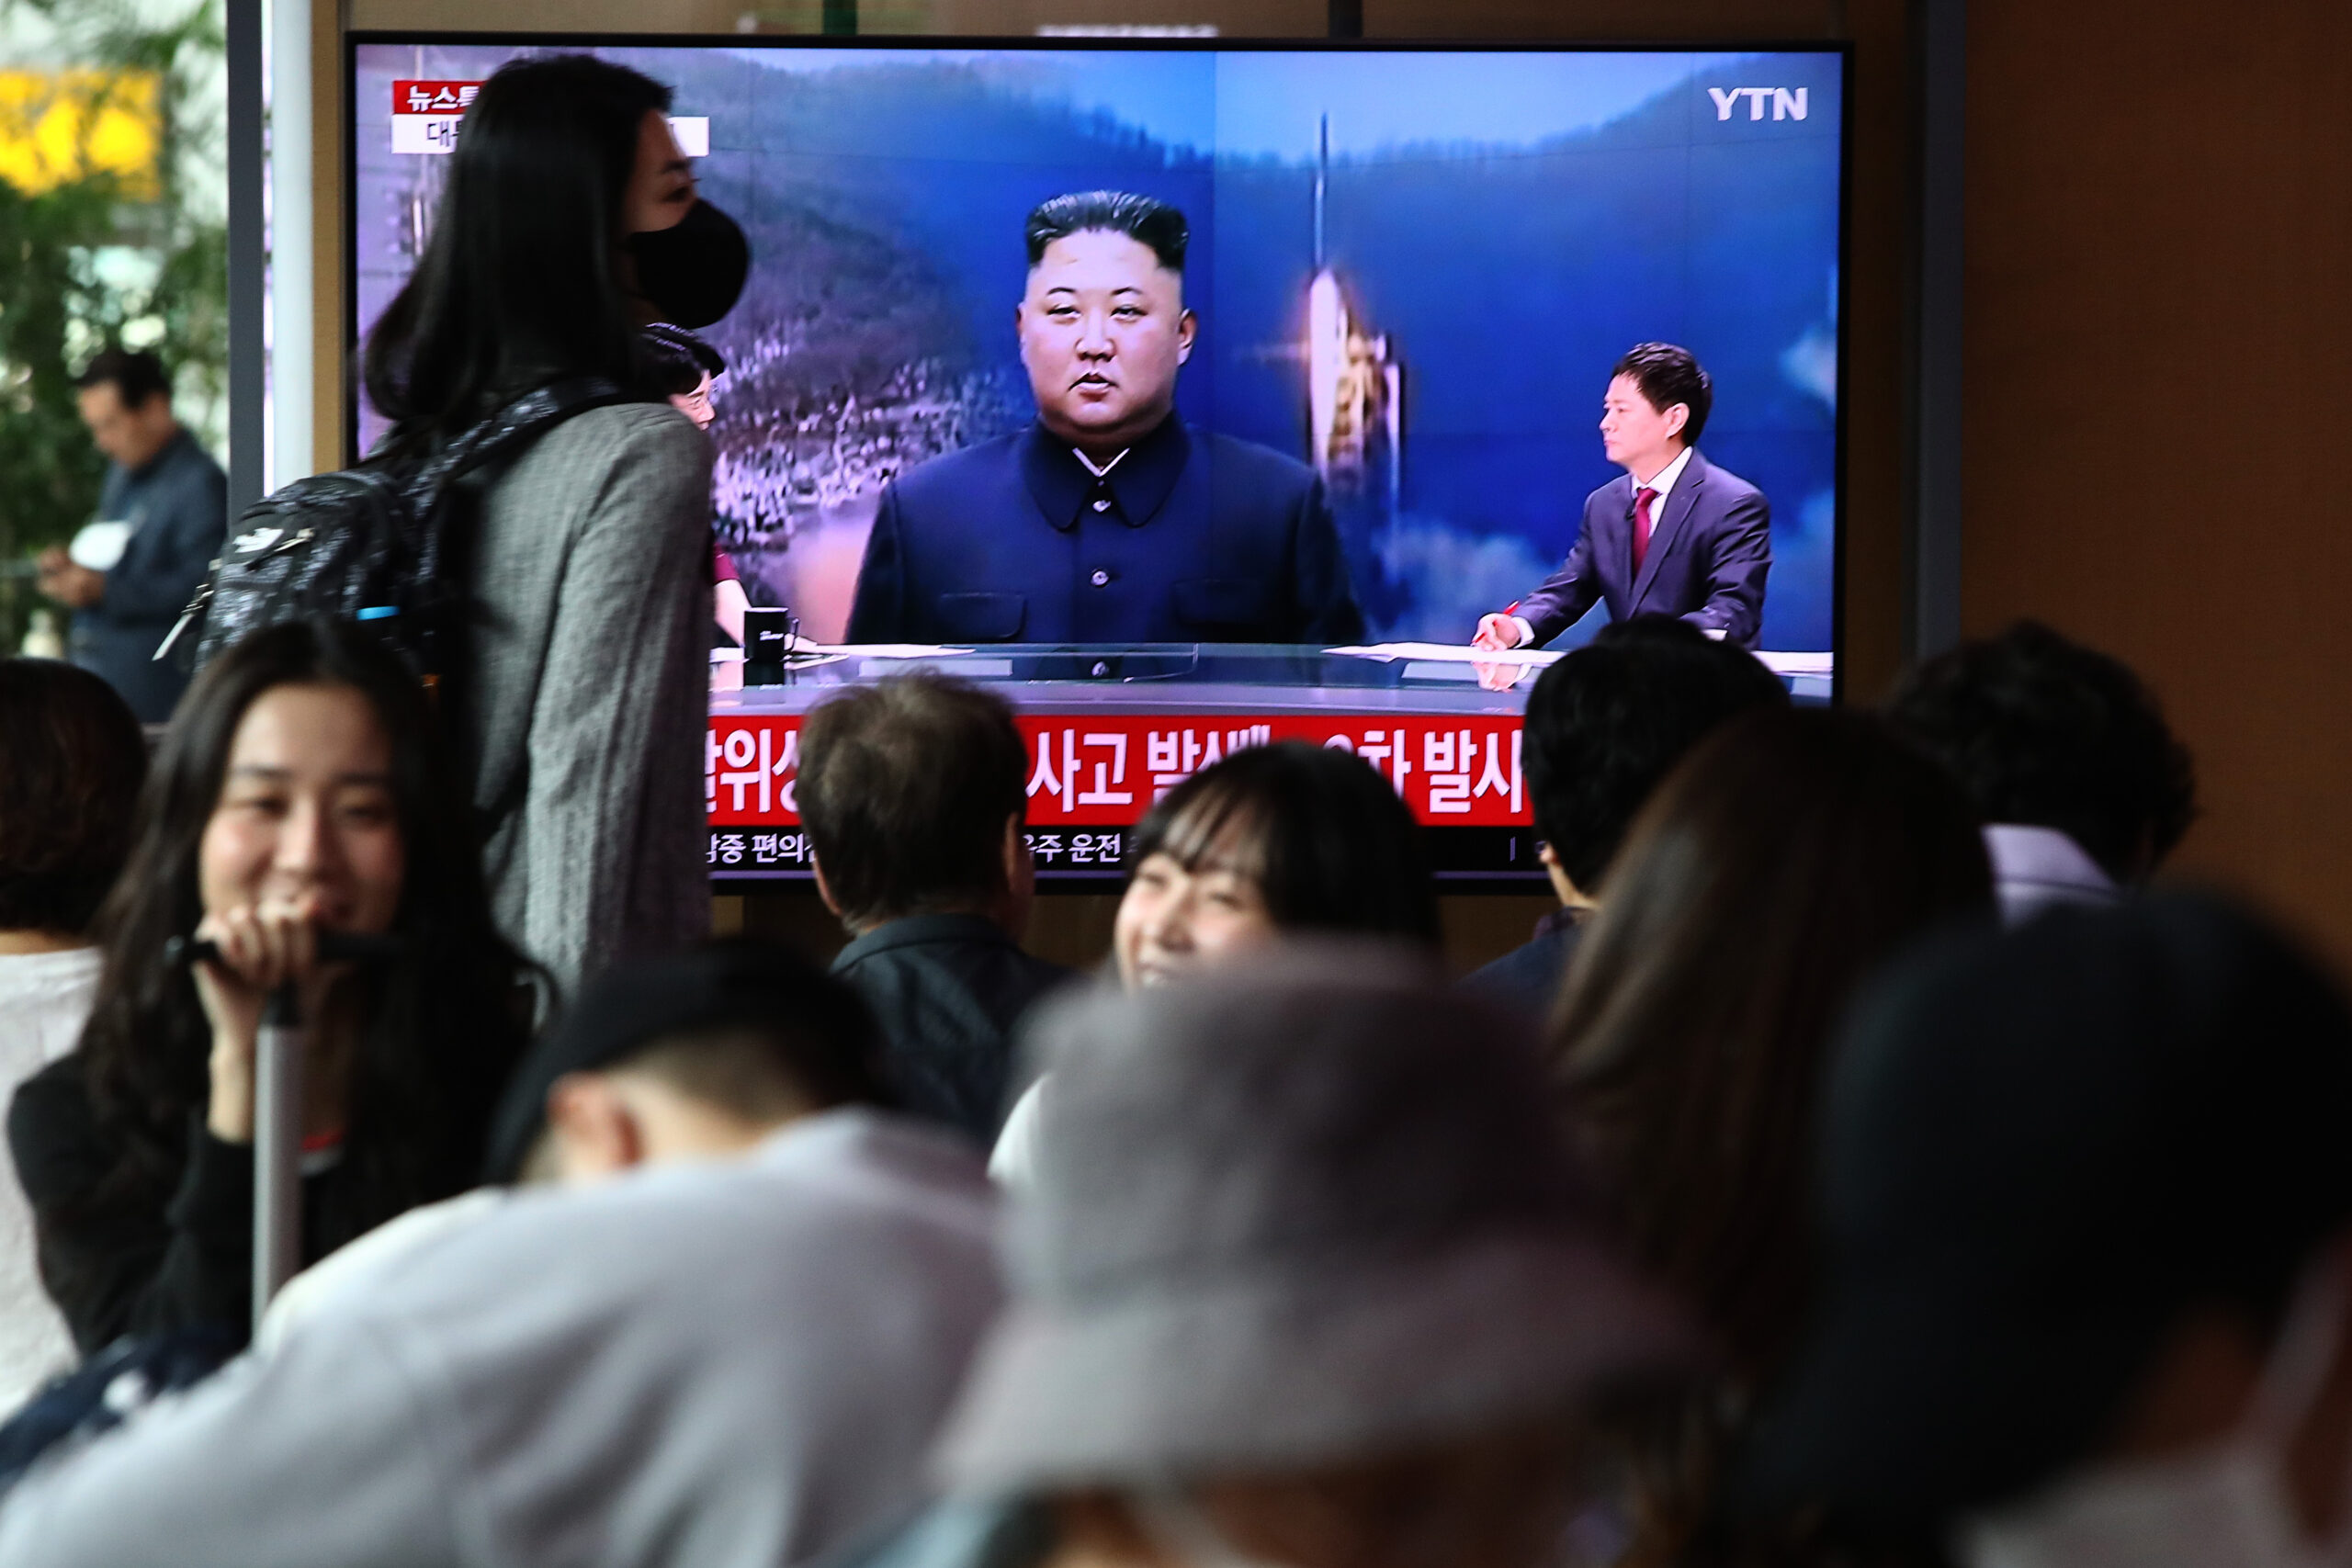 SEOUL, SOUTH KOREA - MAY 31: People watch a television broadcast showing a file image of a North Korean leader Kim Jong-Un at the Seoul Railway Station on May 31, 2023 in Seoul, South Korea. North Korea fired what it claims to be a "space launch vehicle" southward Wednesday, but it fell into the Yellow Sea after an "abnormal" flight, the South Korean military said, in a botched launch that defied international criticism and warnings. (Photo by Chung Sung-Jun/Getty Images)